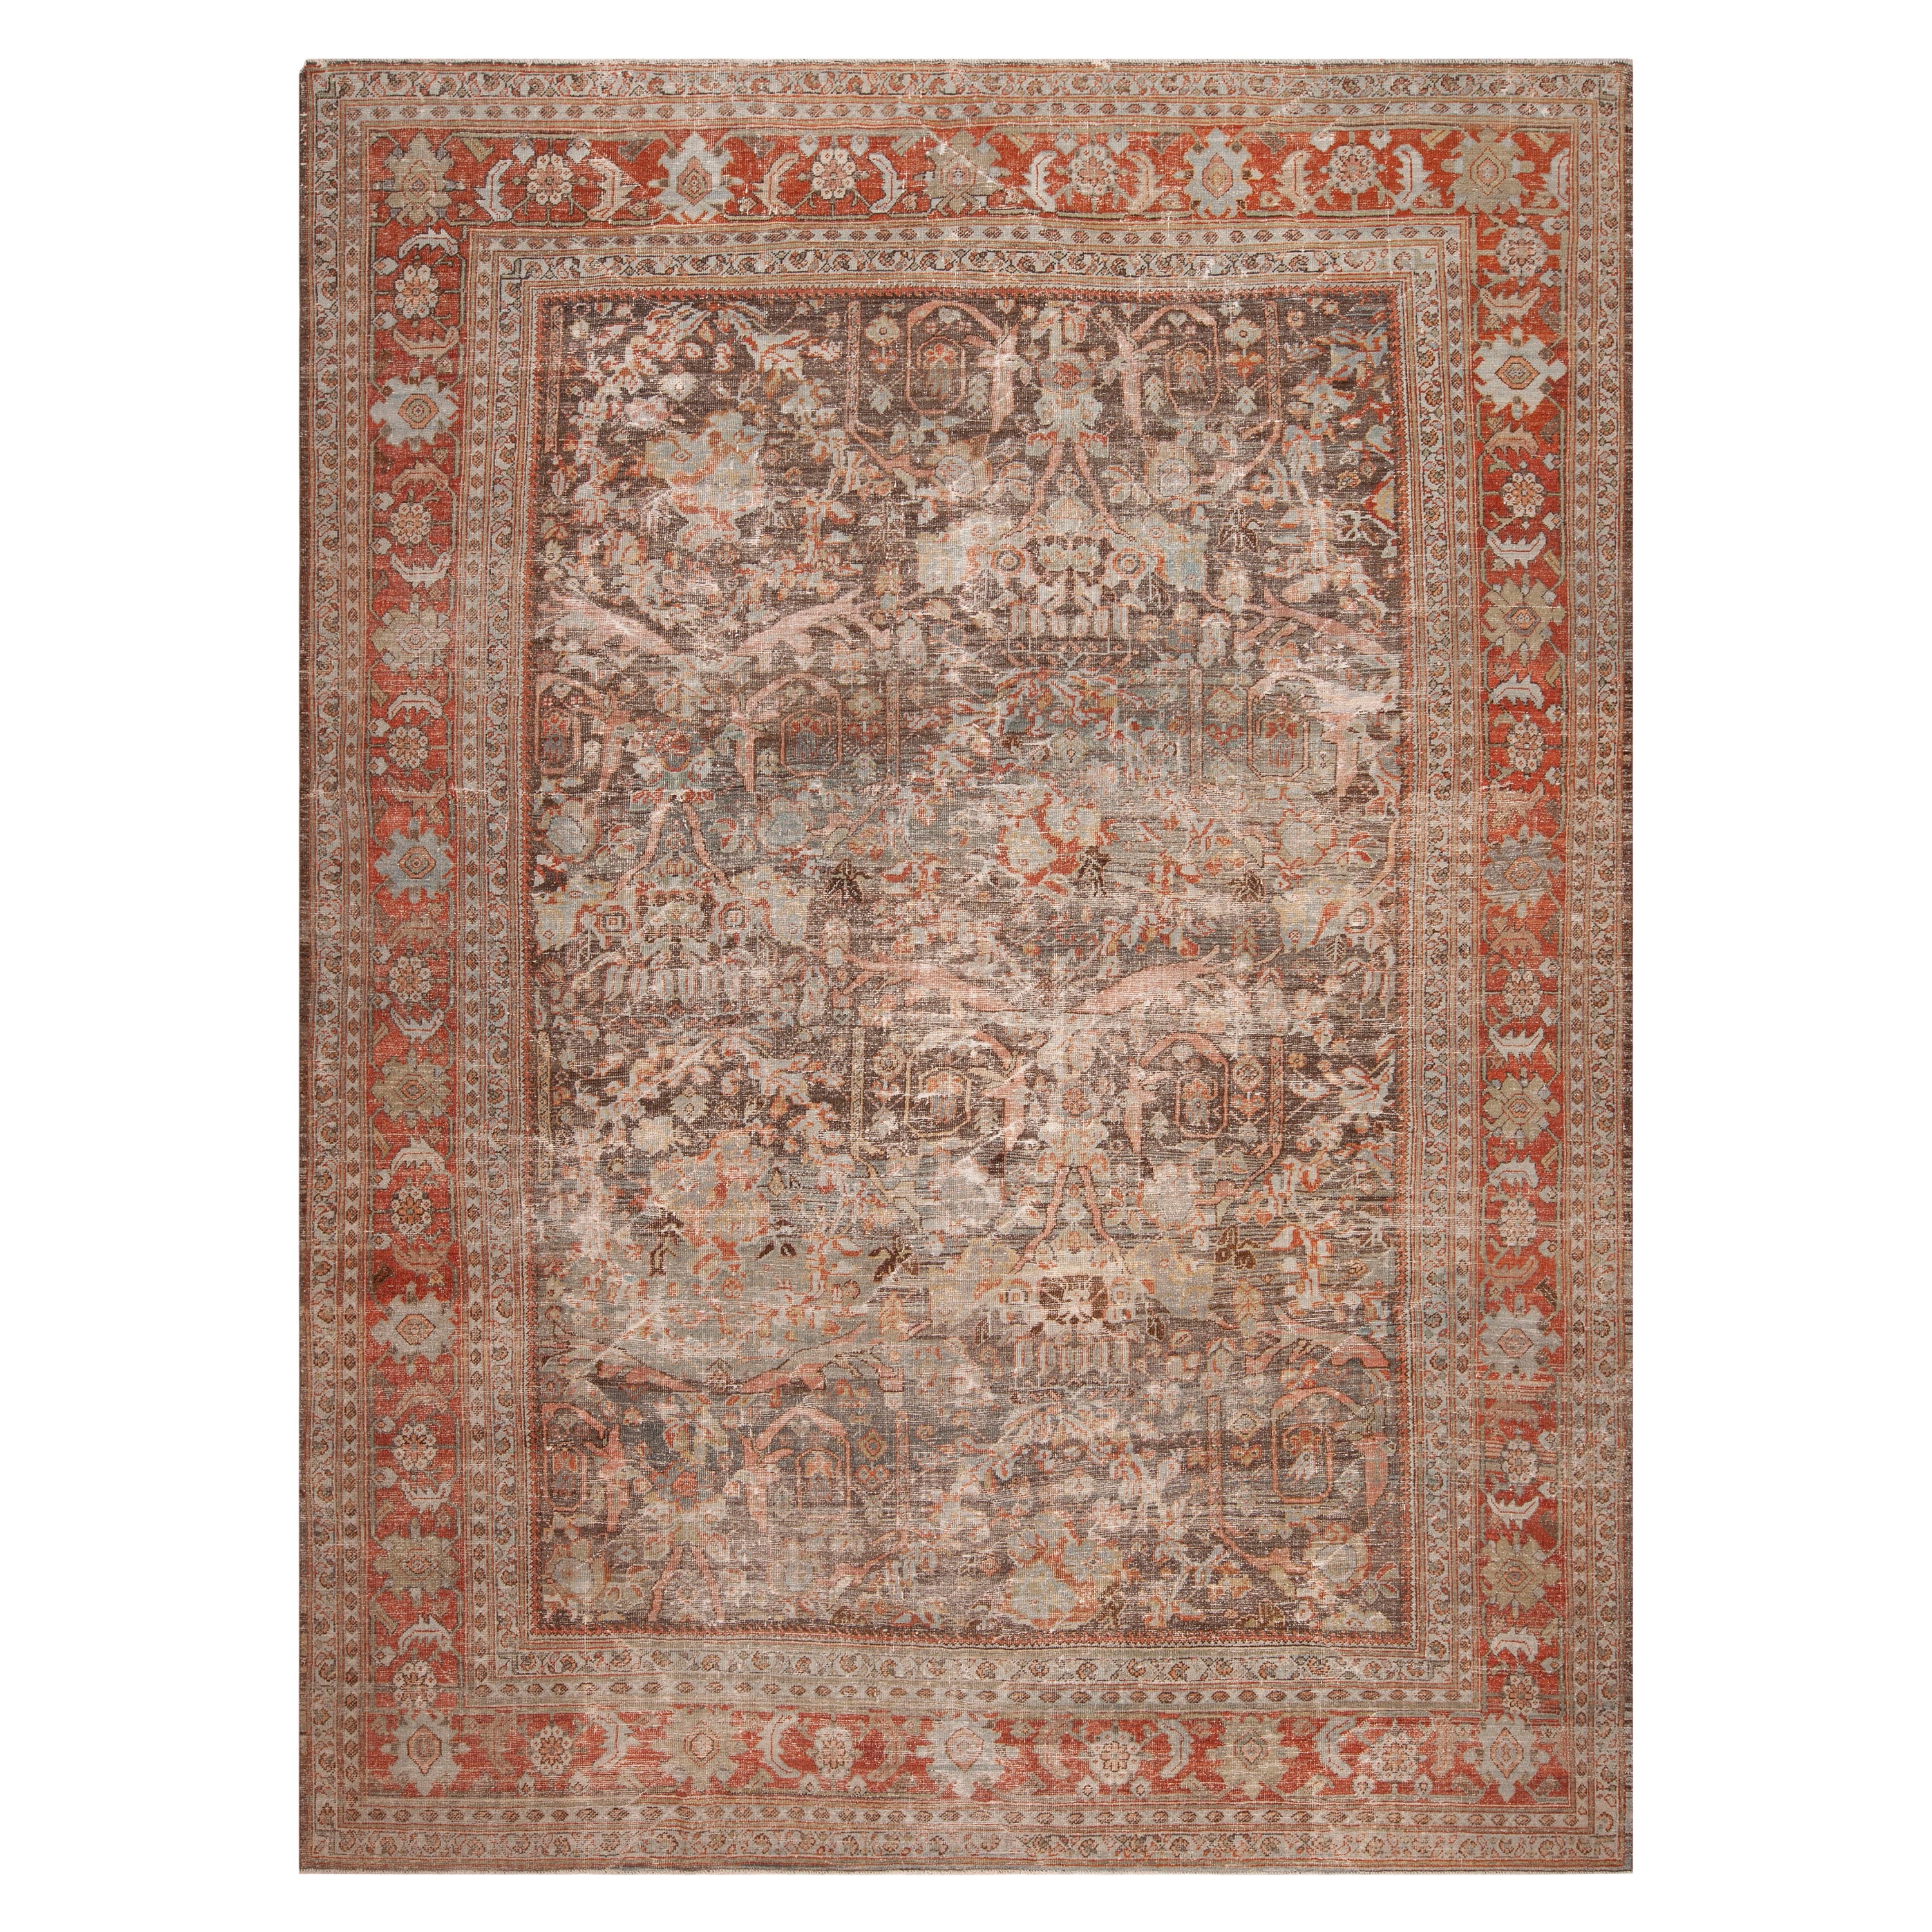 Antique Persian Shabby Chic Sultanabad Area Rug 10' x 13'